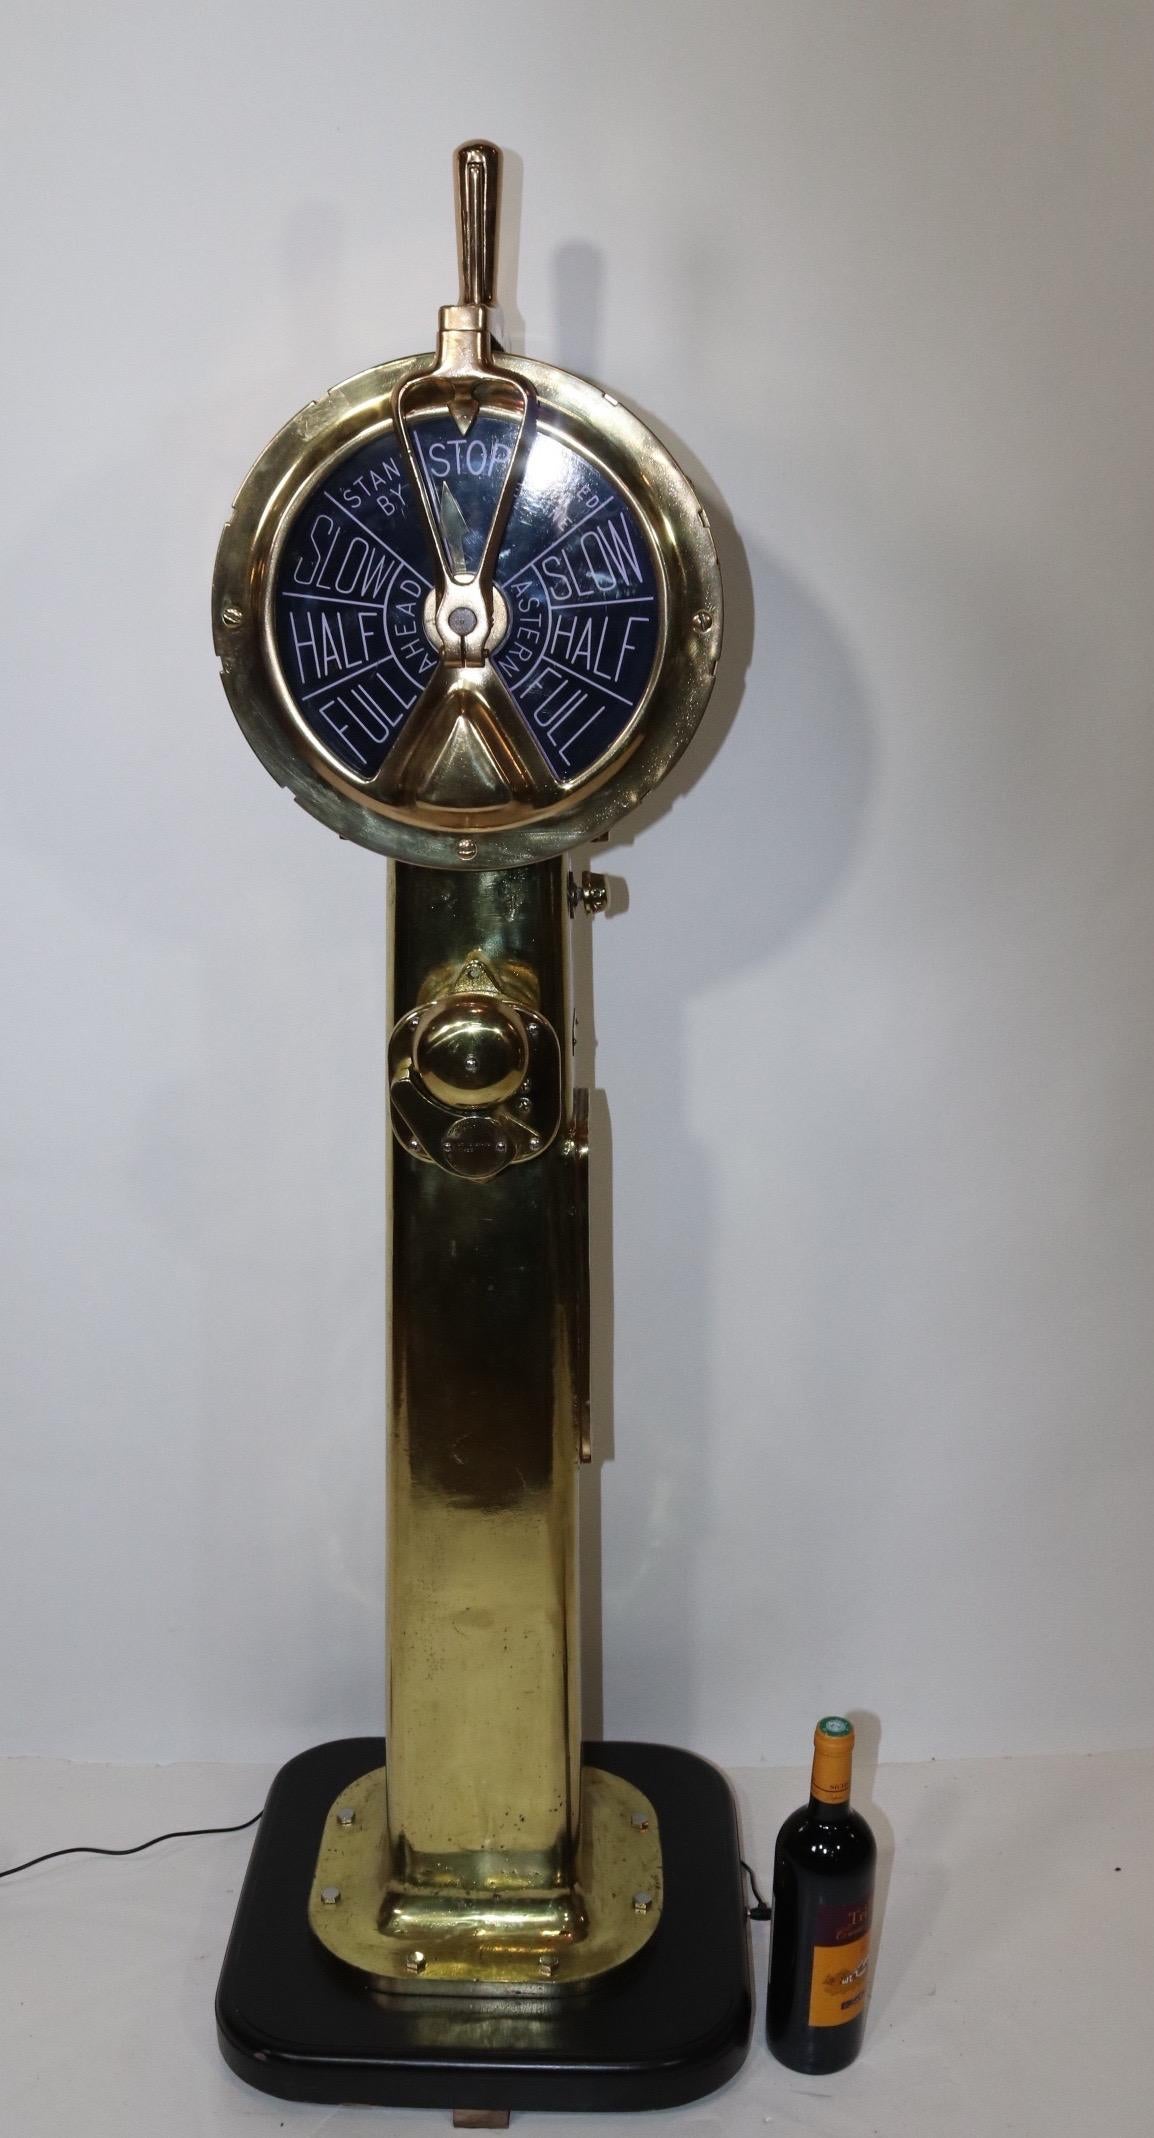 Engine Order Telegraph that has been meticulously polished and lacquered. Faceplates engraved with black background and white letters. Telegraph is mounted to a wood base. Manufactured by Henshel of Amesbury, Massachusetts, circa 1940. We have wired